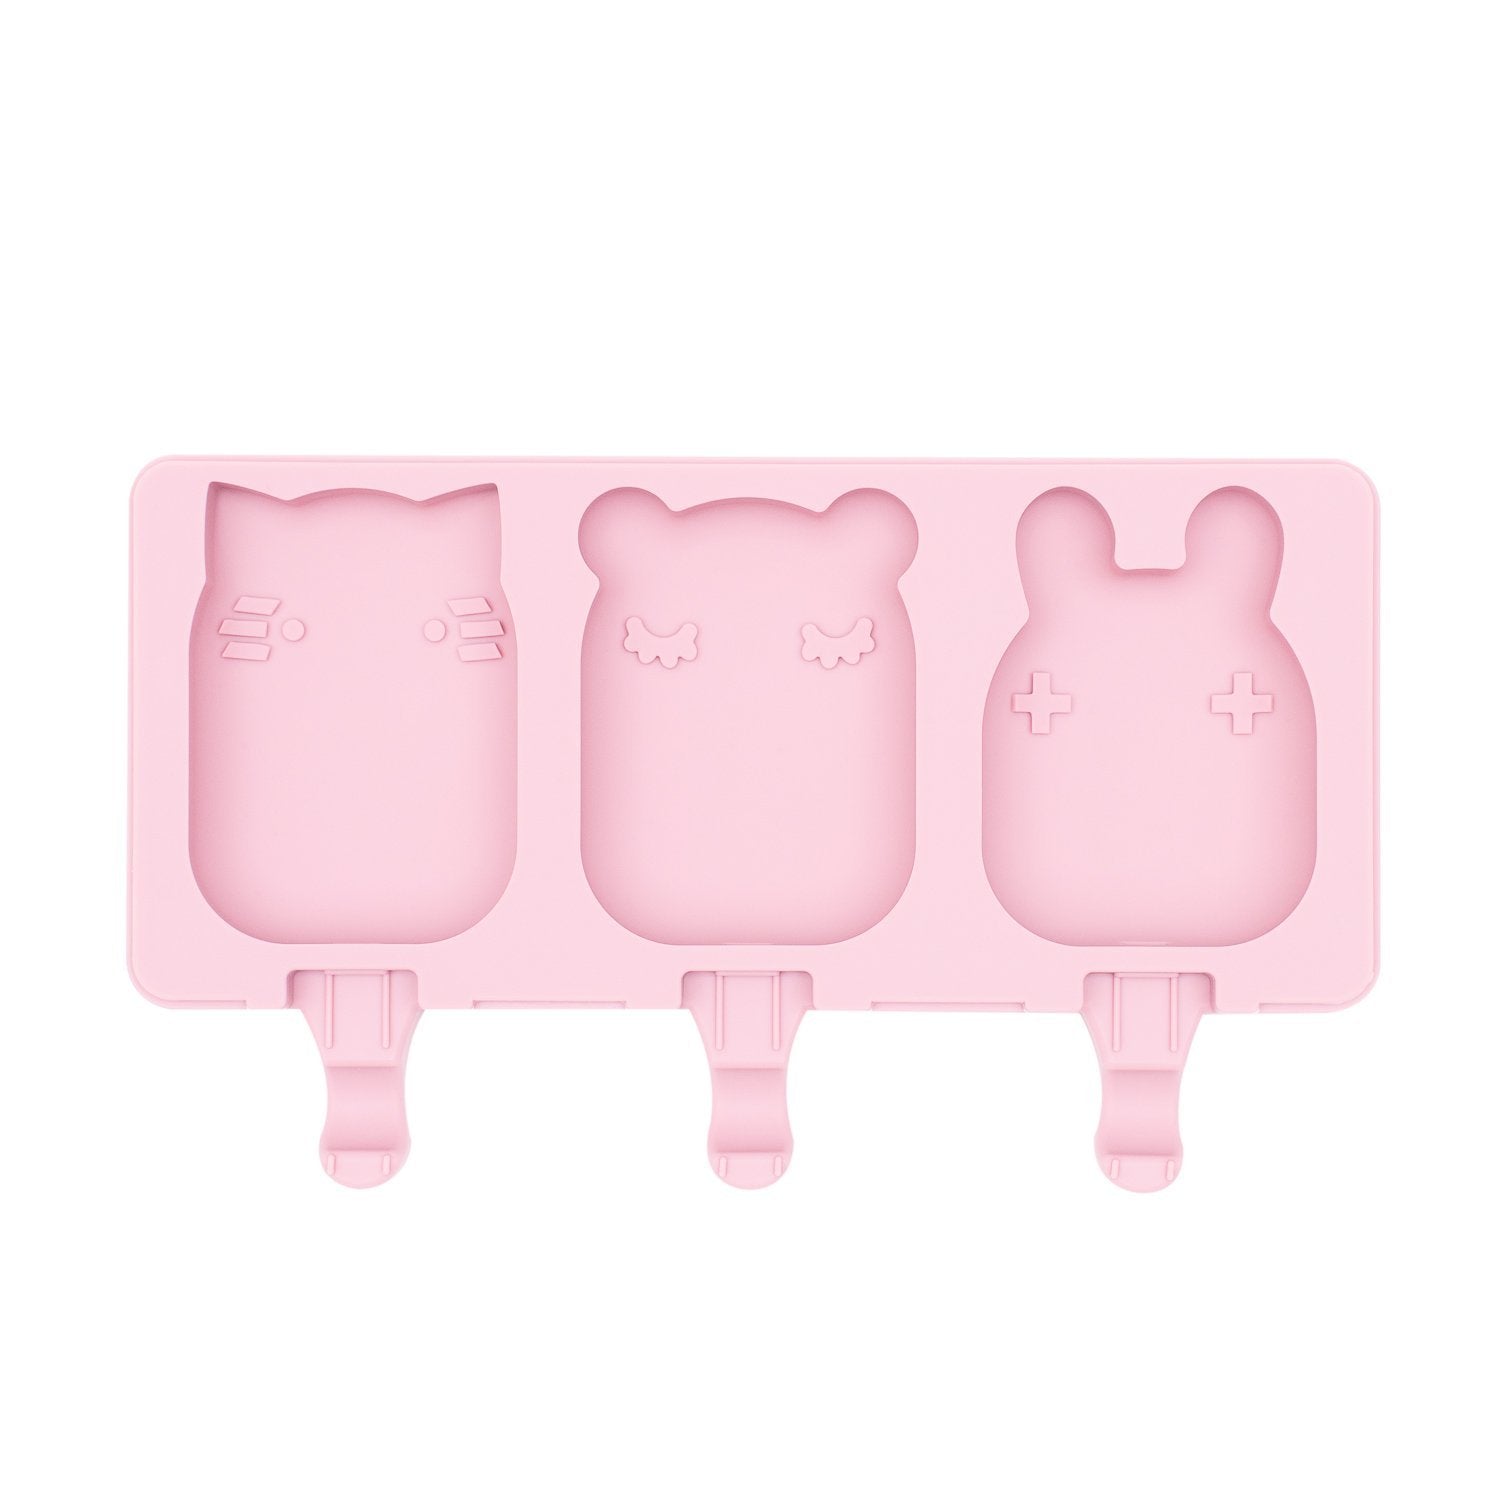 Frosties Icy Pole Mould (Powder Pink)